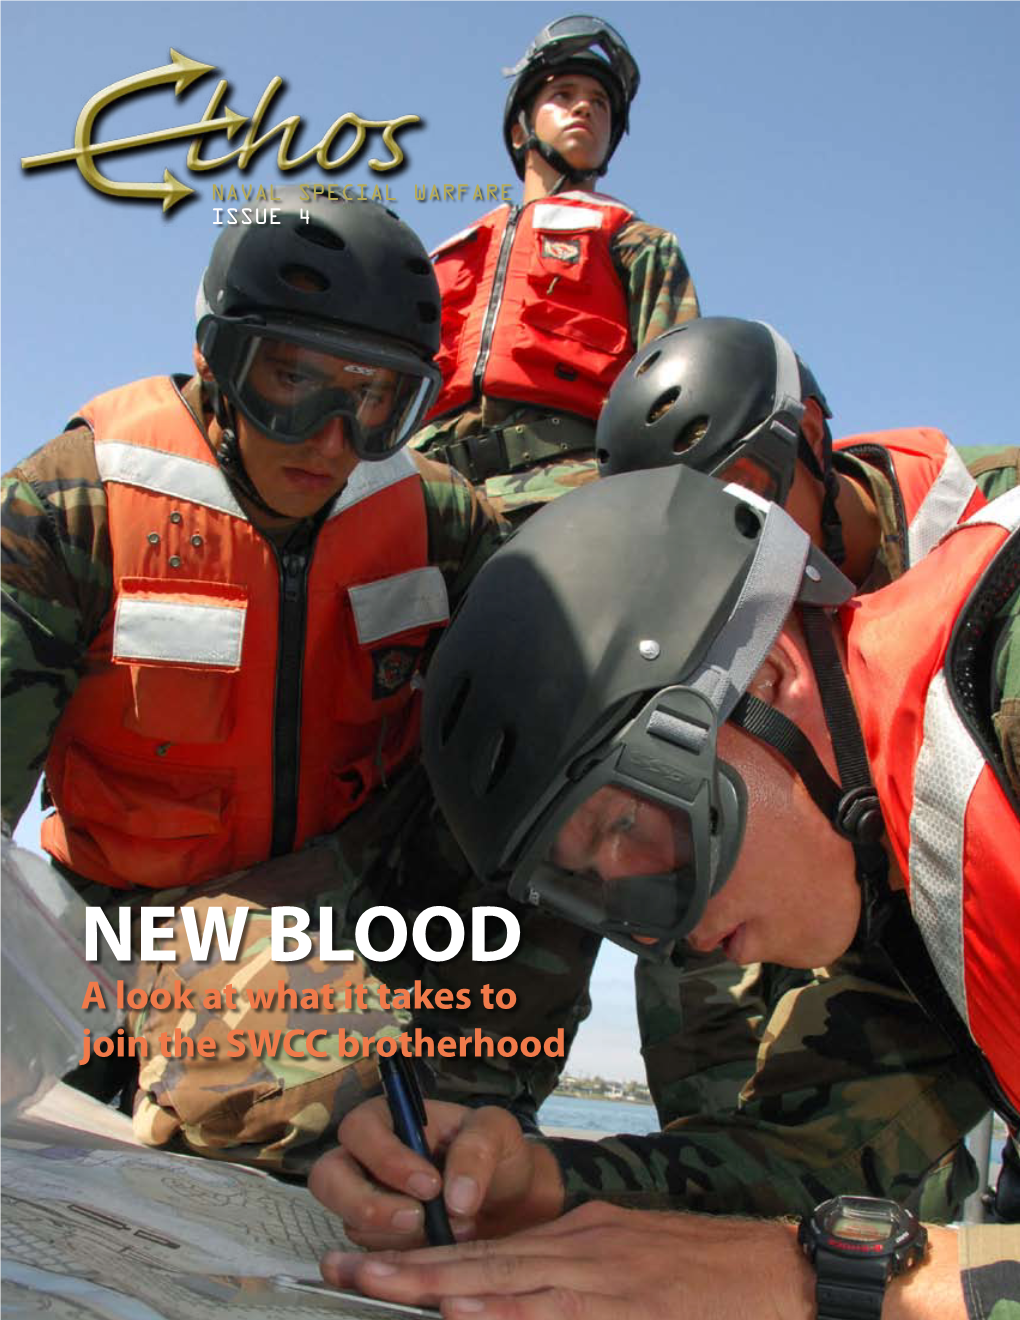 NEW BLOOD a Look at What It Takes to Join the SWCC Brotherhood 1: Building Warriors Quiet Professionalism Begins at the Center